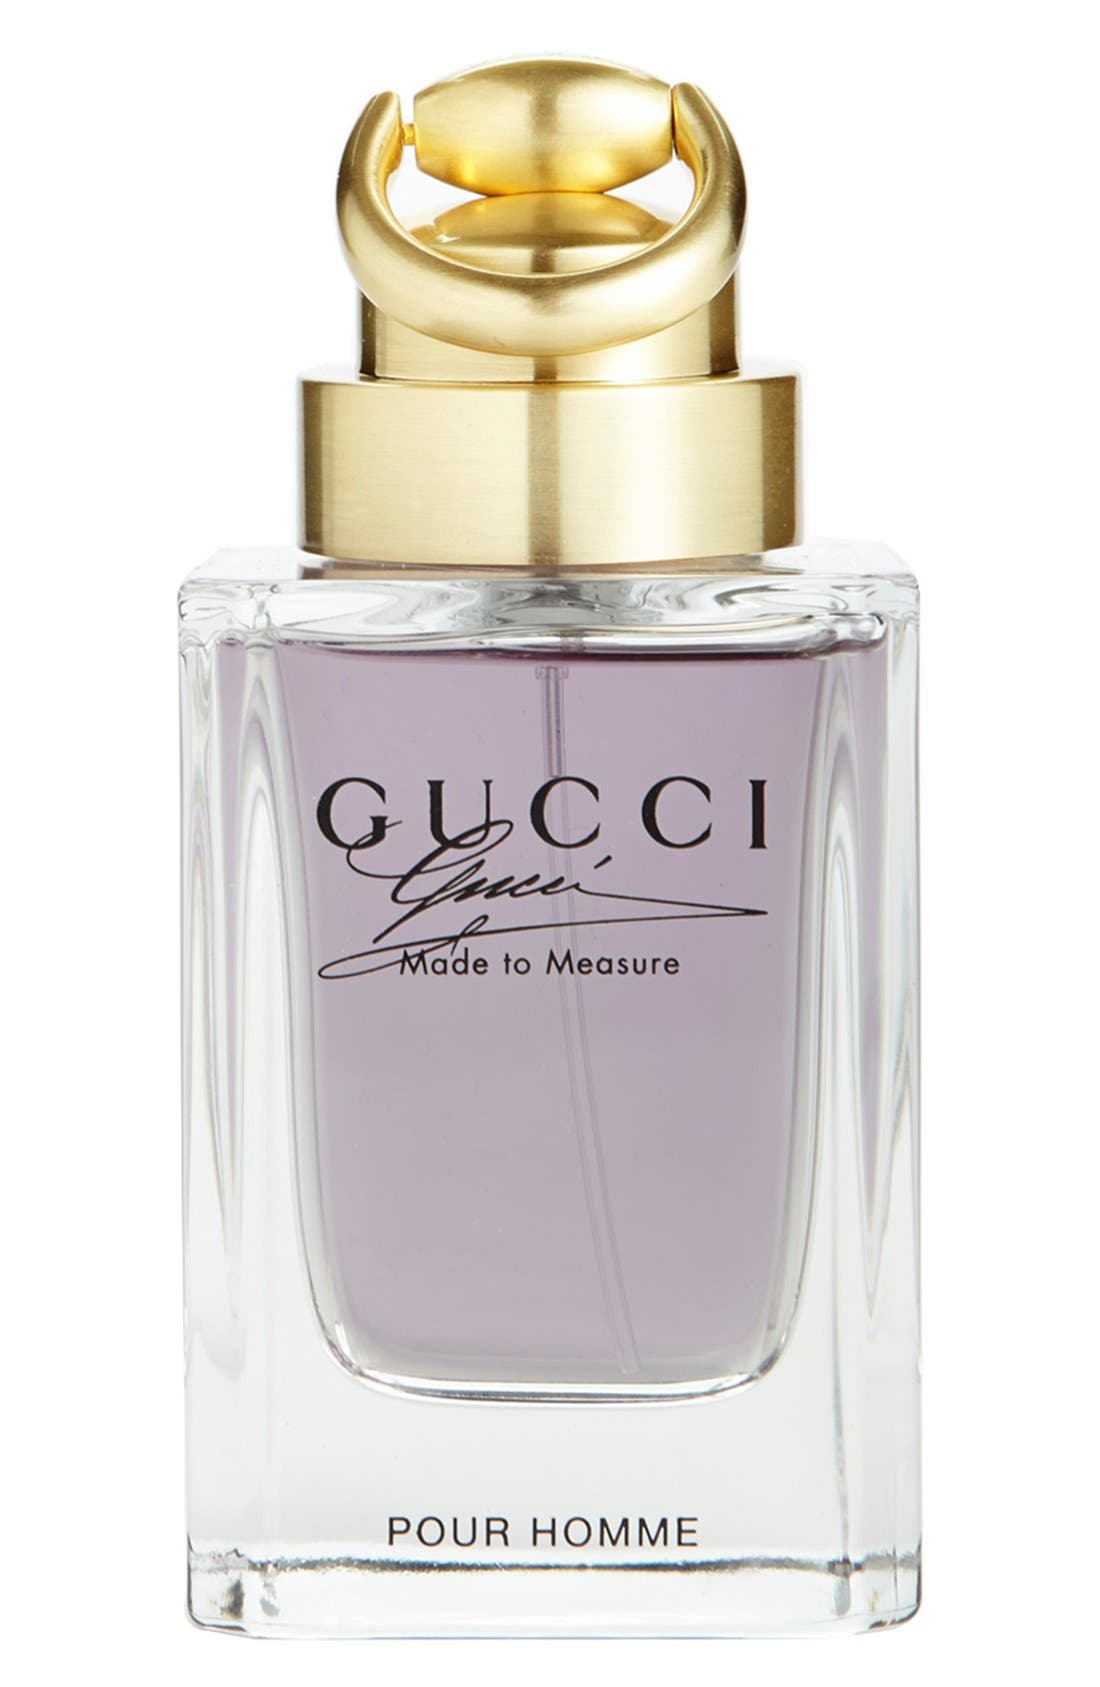 gucci made to measure parfum